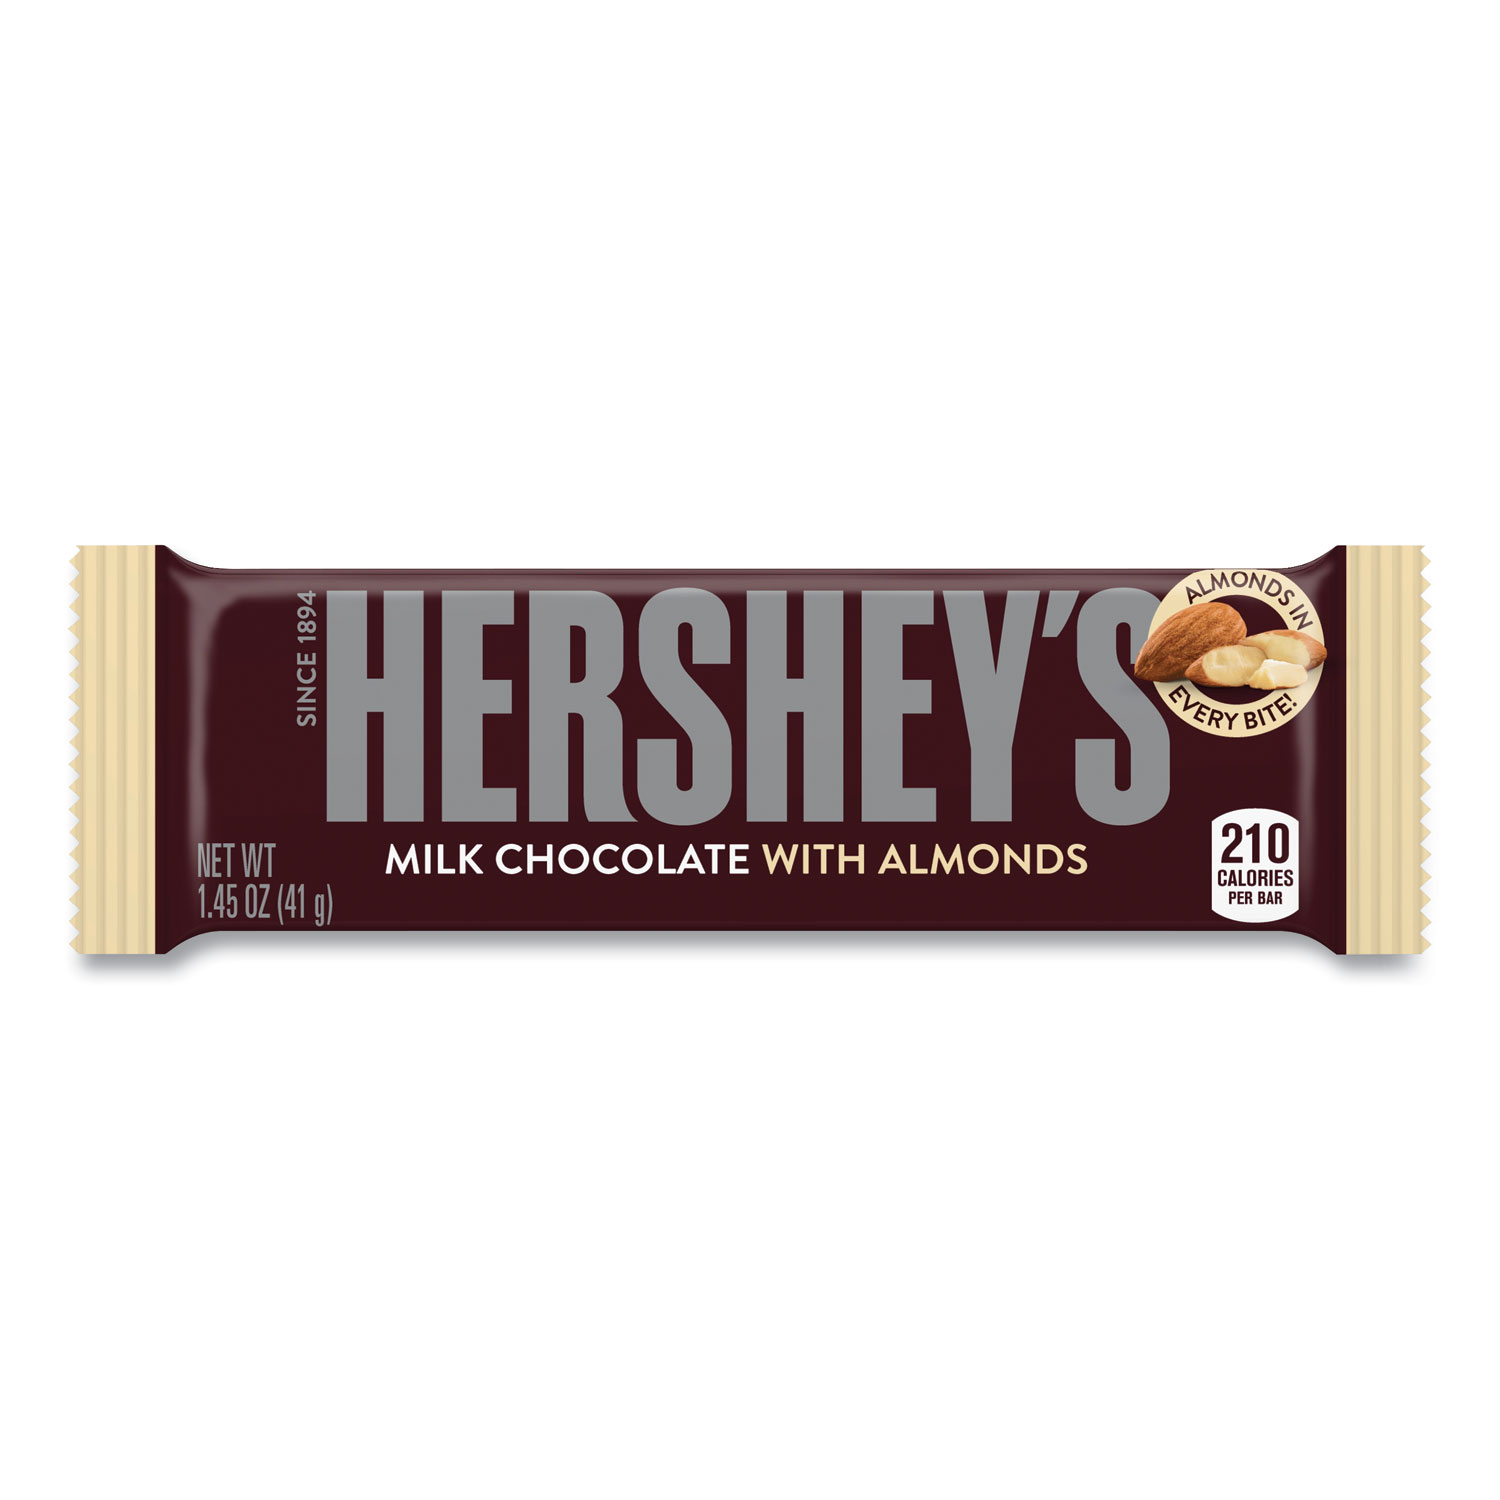  Hershey's 24100 Milk Chocolate with Almonds, 1.45 oz Bar, 36/Box, Free Delivery in 1-4 Business Days (GRR24600043) 